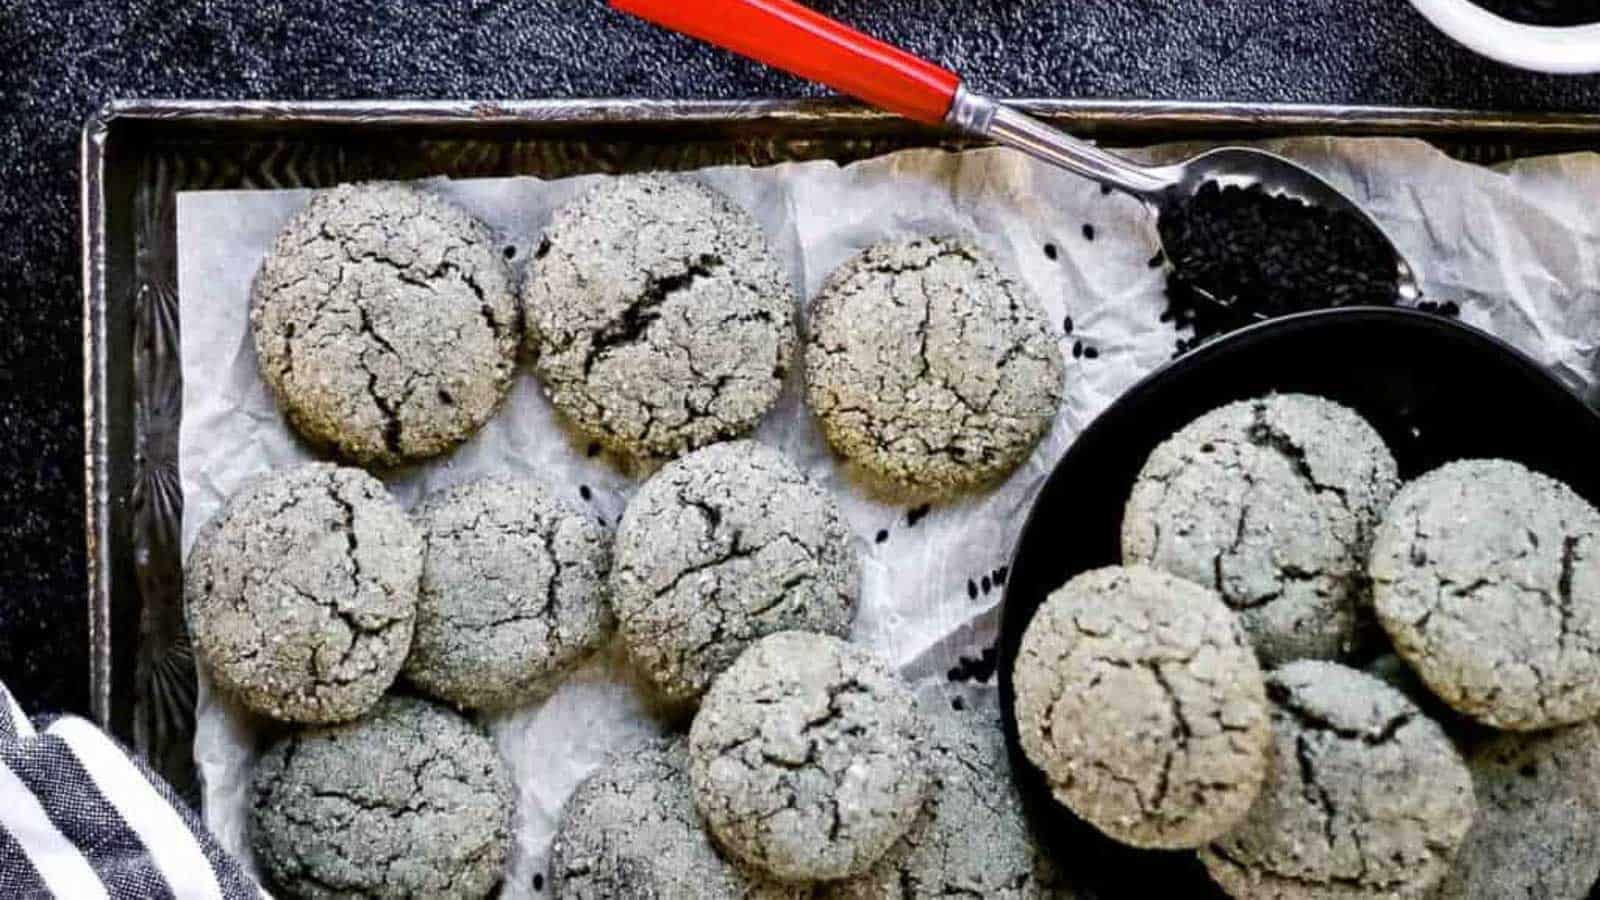 Black sesame cookies on a baking sheet with a spoonful of black sesame seeds.